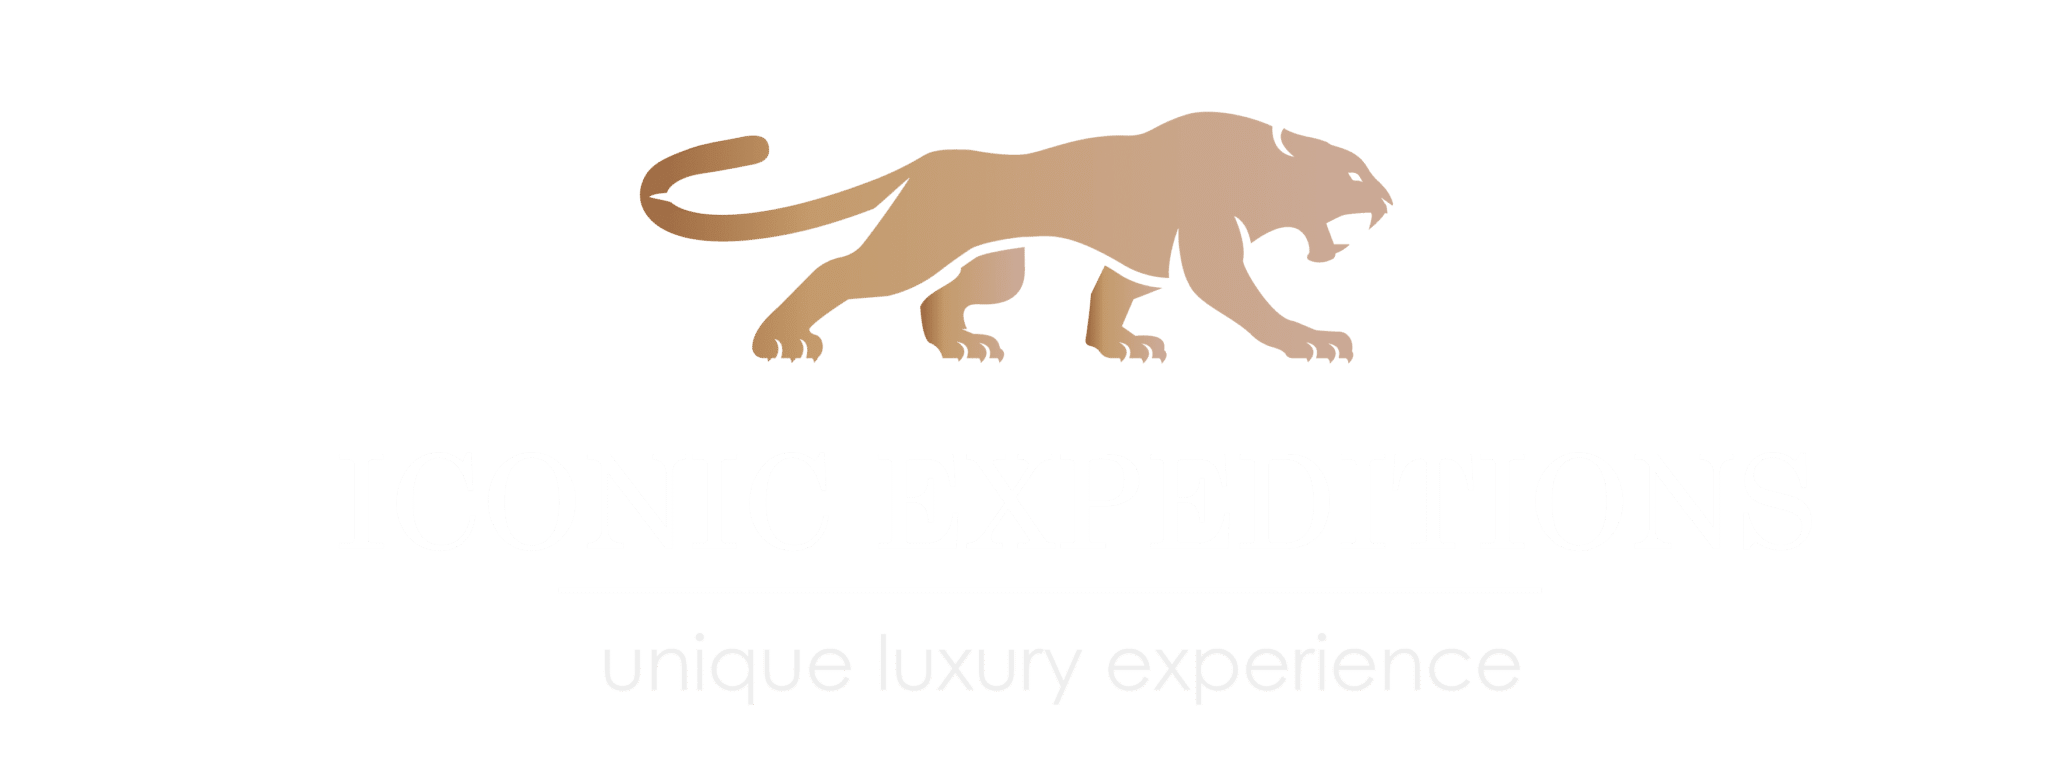 Iconic Expeditions